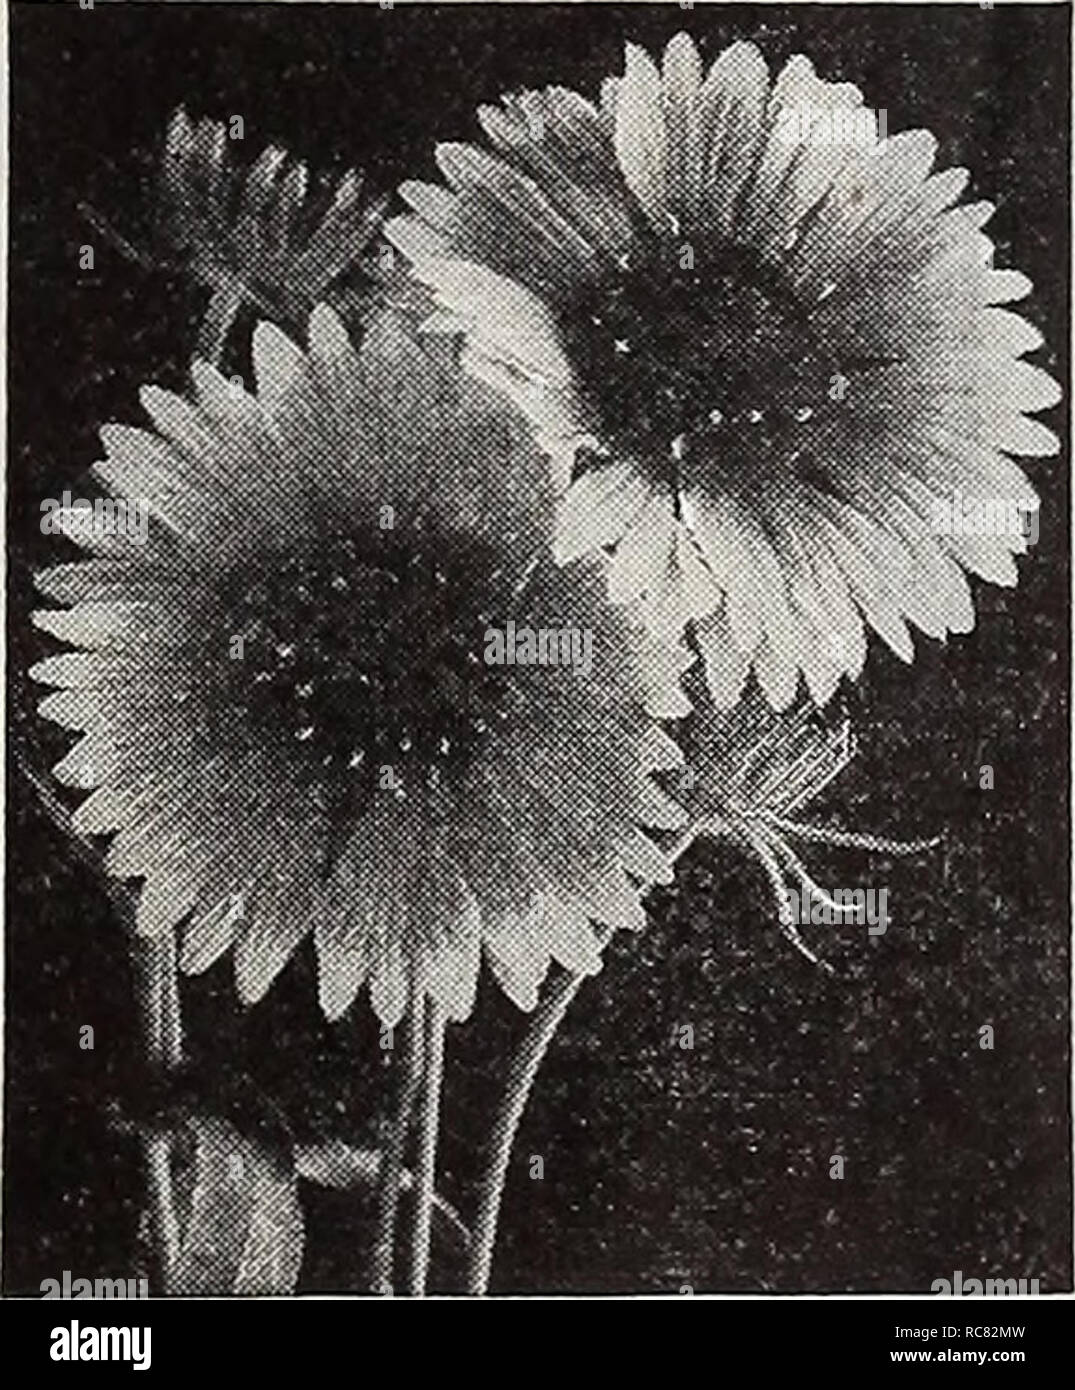 . Dreer's garden book for 1940. Seeds Catalogs; Nursery stock Catalogs; Gardening Equipment and supplies Catalogs; Flowers Seeds Catalogs; Vegetables Seeds Catalogs; Fruit Seeds Catalogs. Dimorphotheca, Glistening White Gaillardia Grandiflora M 2441 Goblin Bushy plants only 15 inches tall covered throughout the summer with large, showy, deep red blooms bordered with brilliant yellow. Excellent for beds and borders. Pkt. 20c; special pkt. 75c. 2436 Chloe Large well-formed single blooms of an enticing Indian yellow which is entirely different from all other hardy Gaillardias. A free bloomer, fin Stock Photo